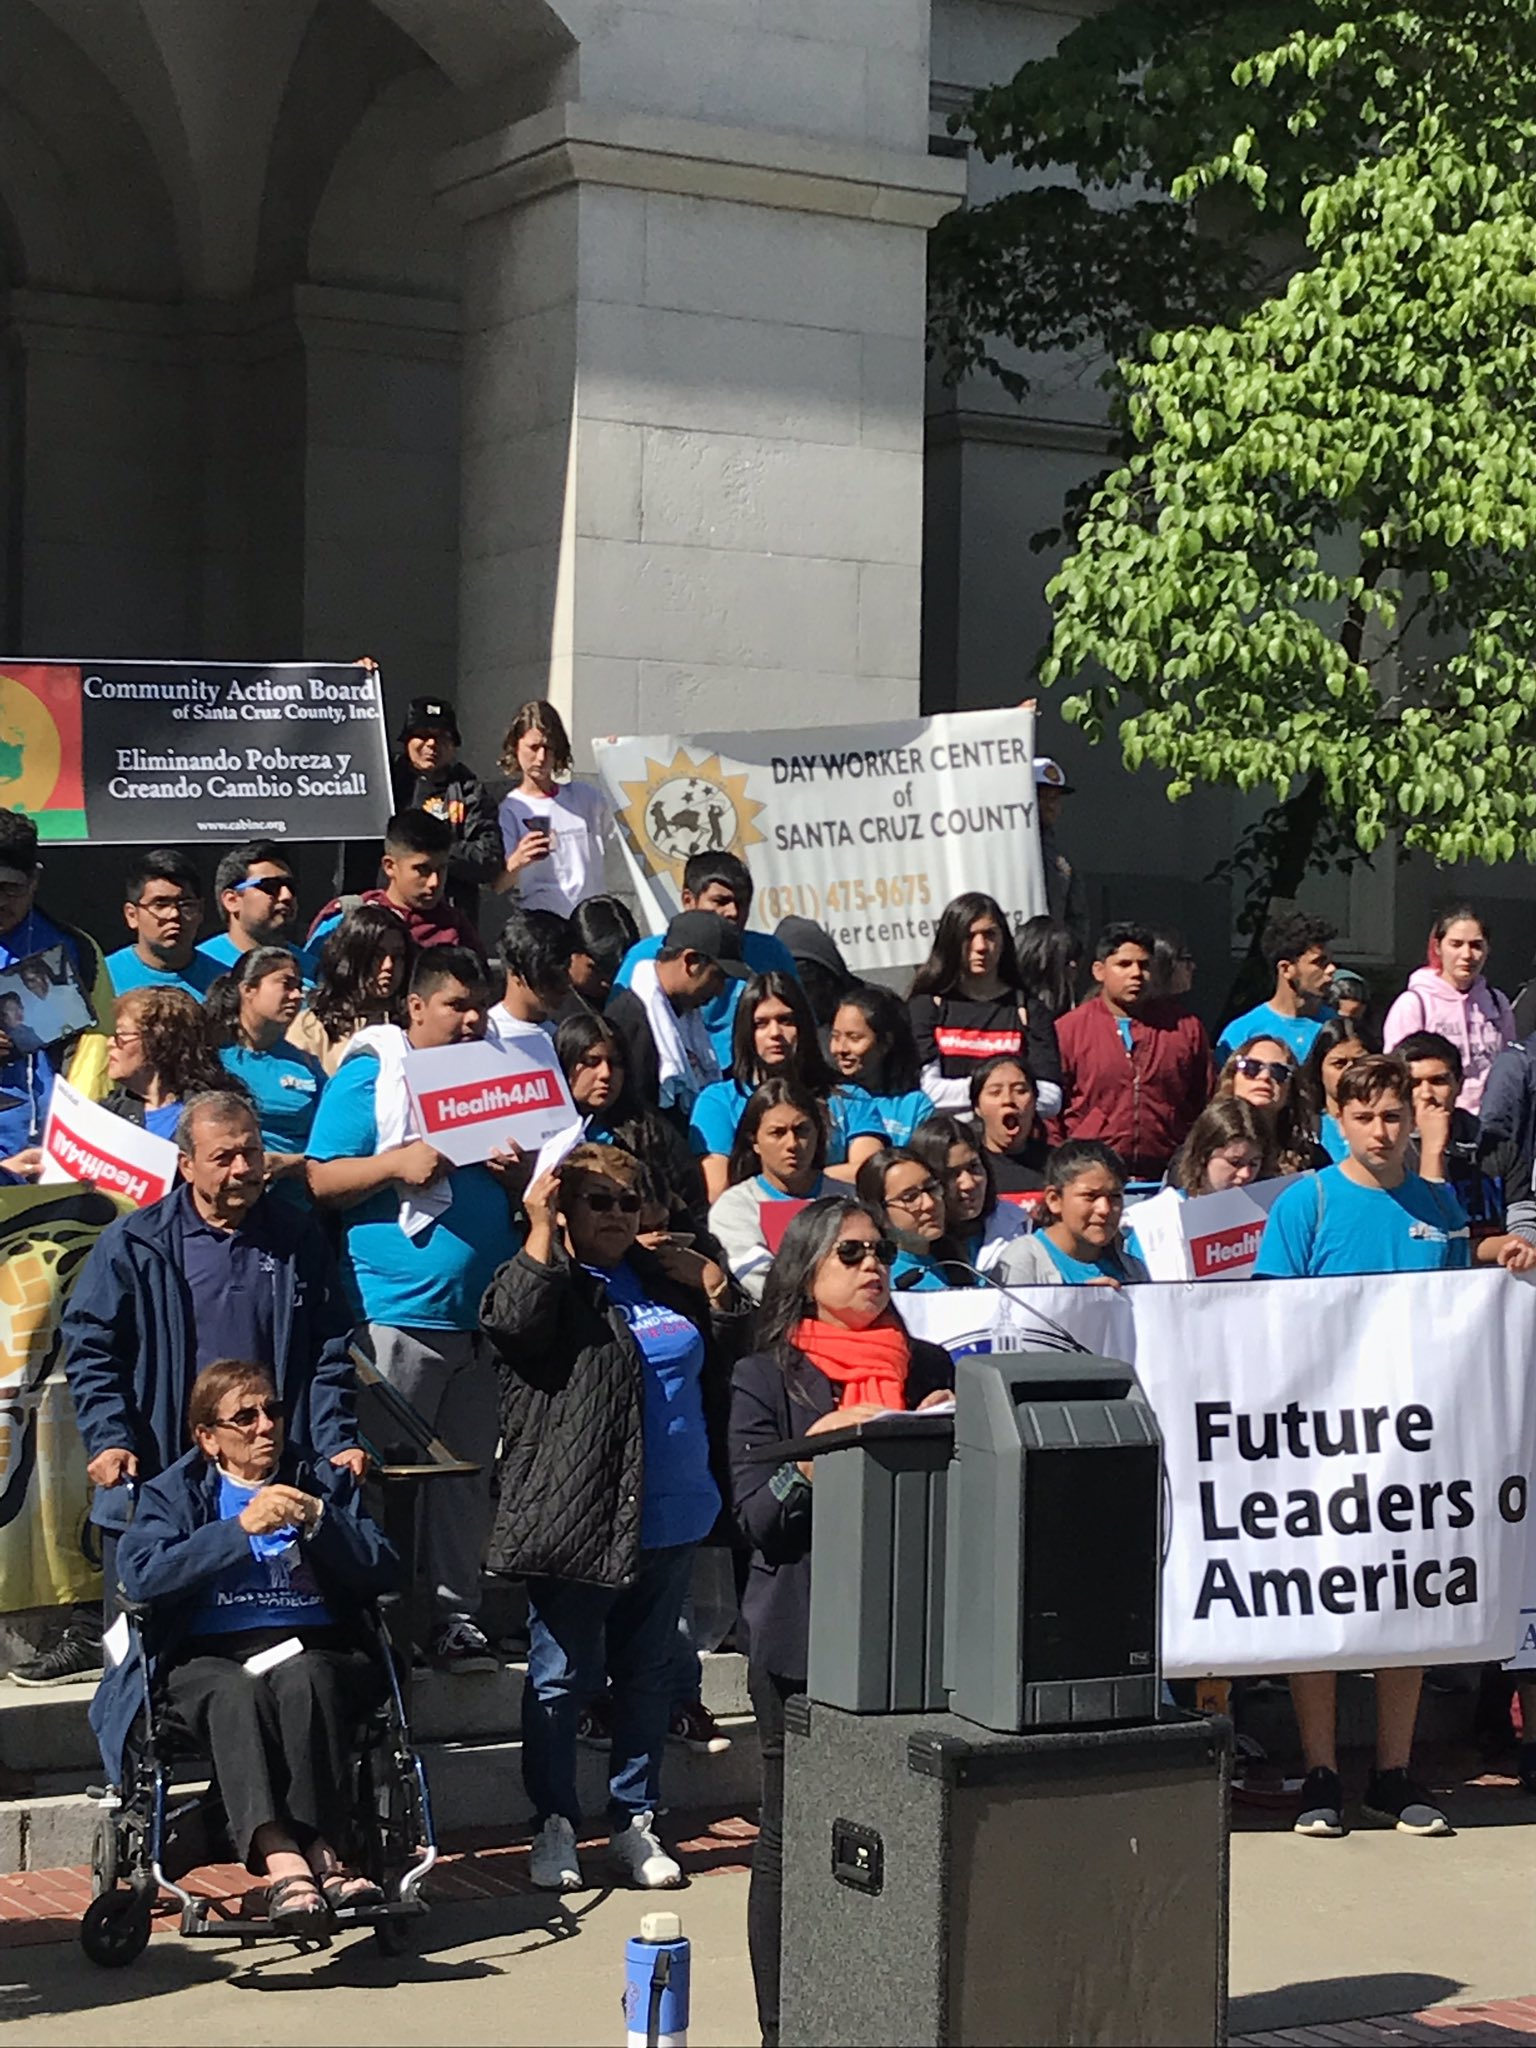 California Immigrant Policy Center on Twitter: "Cynthia Buiza, Executive Director of CIPC at #immday19 we love and our freedoms, if we care about our immigrant neighbors and the life we